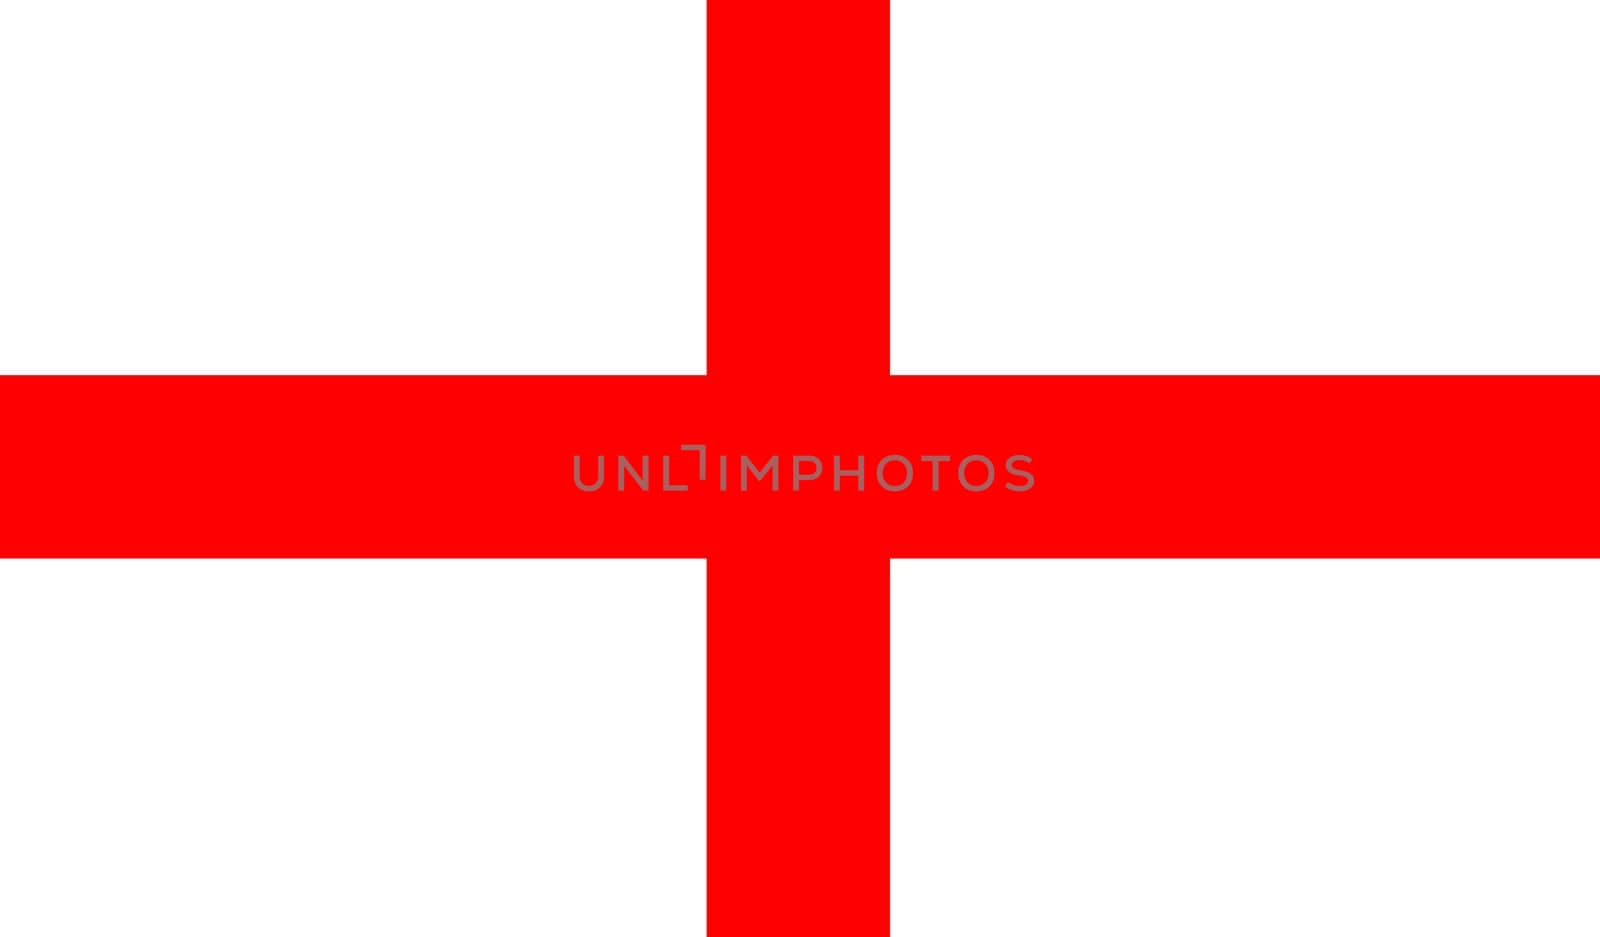 The flag of England and Saint George red cross on a white background